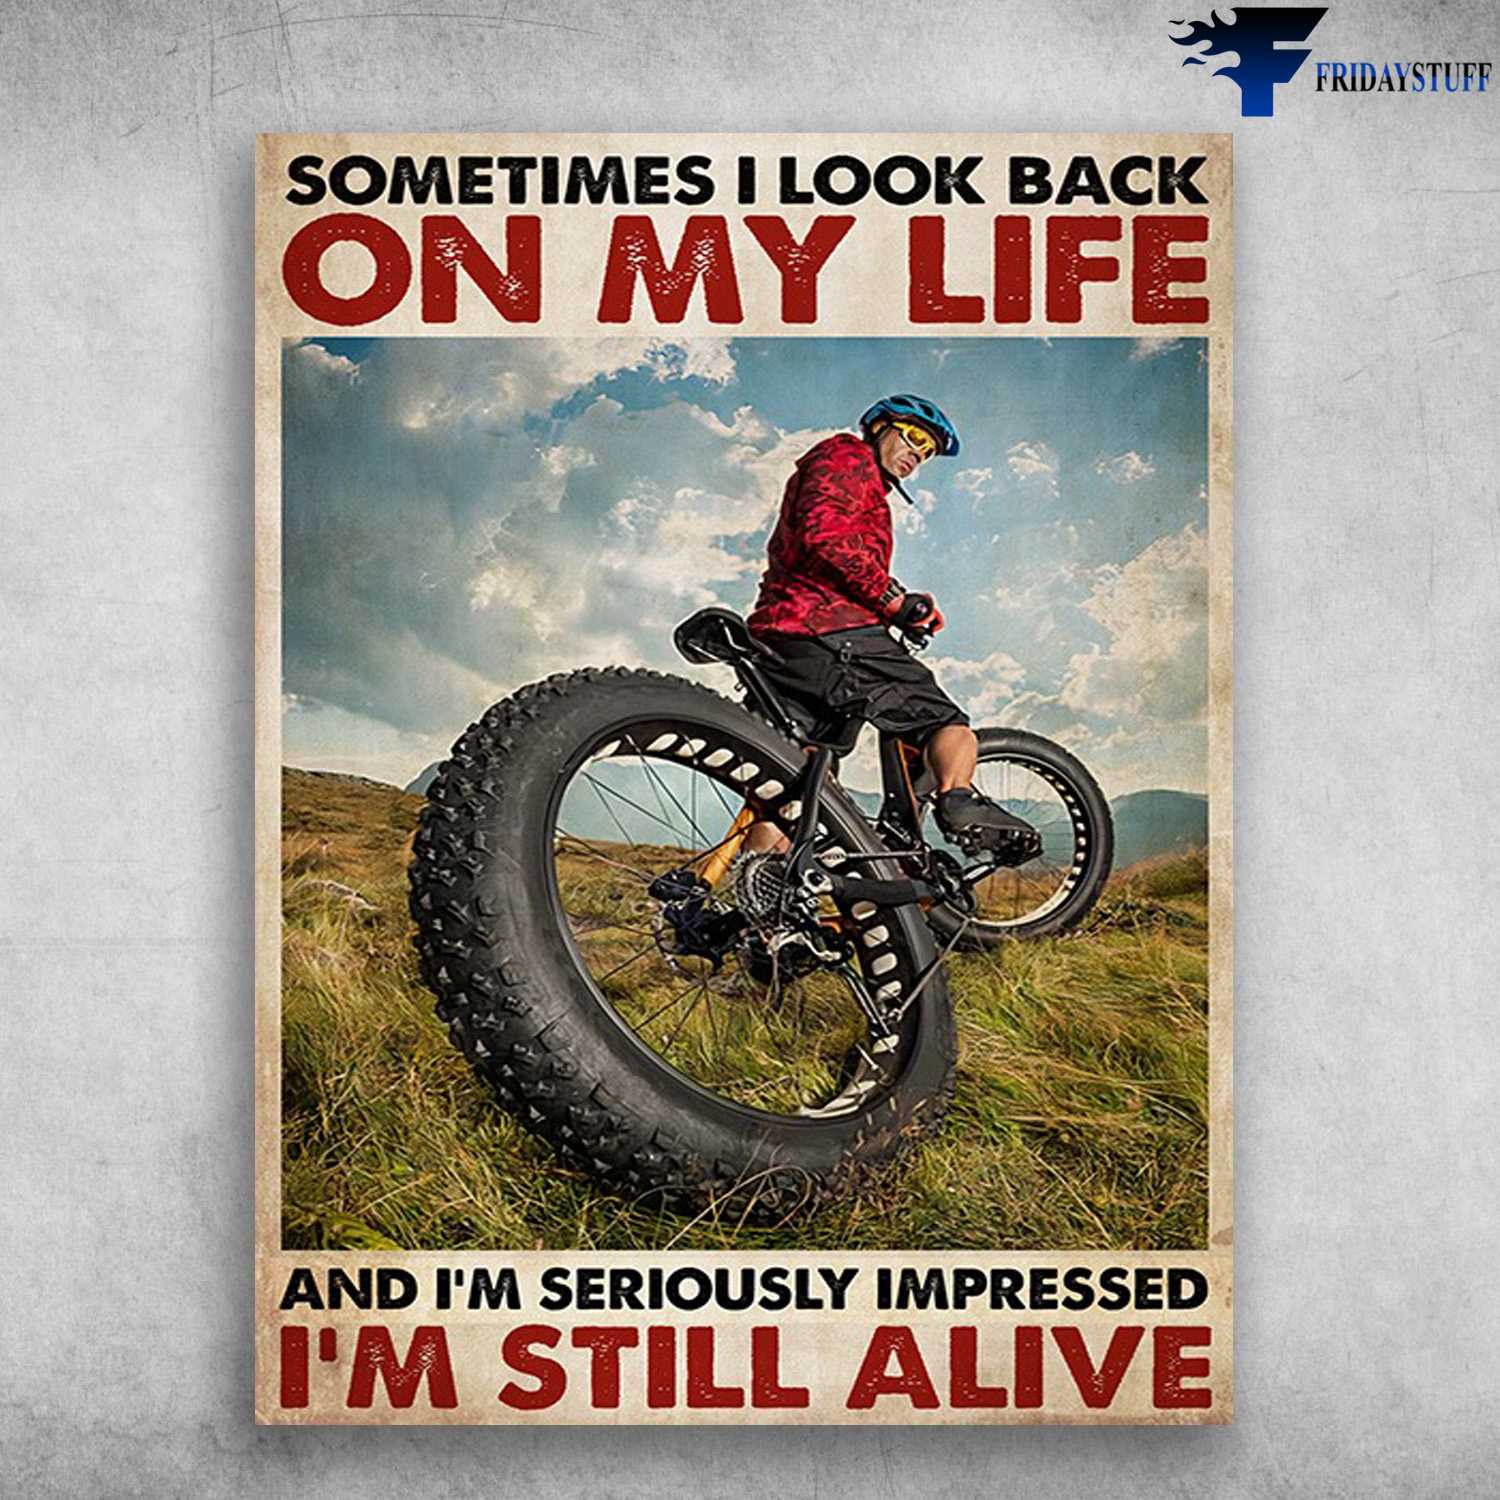 Cycling Man, Biker Poster - Sometimes I Look Back On My Life, And I'm Seriously Impressed, I'm Still Alive, Mountain Biking